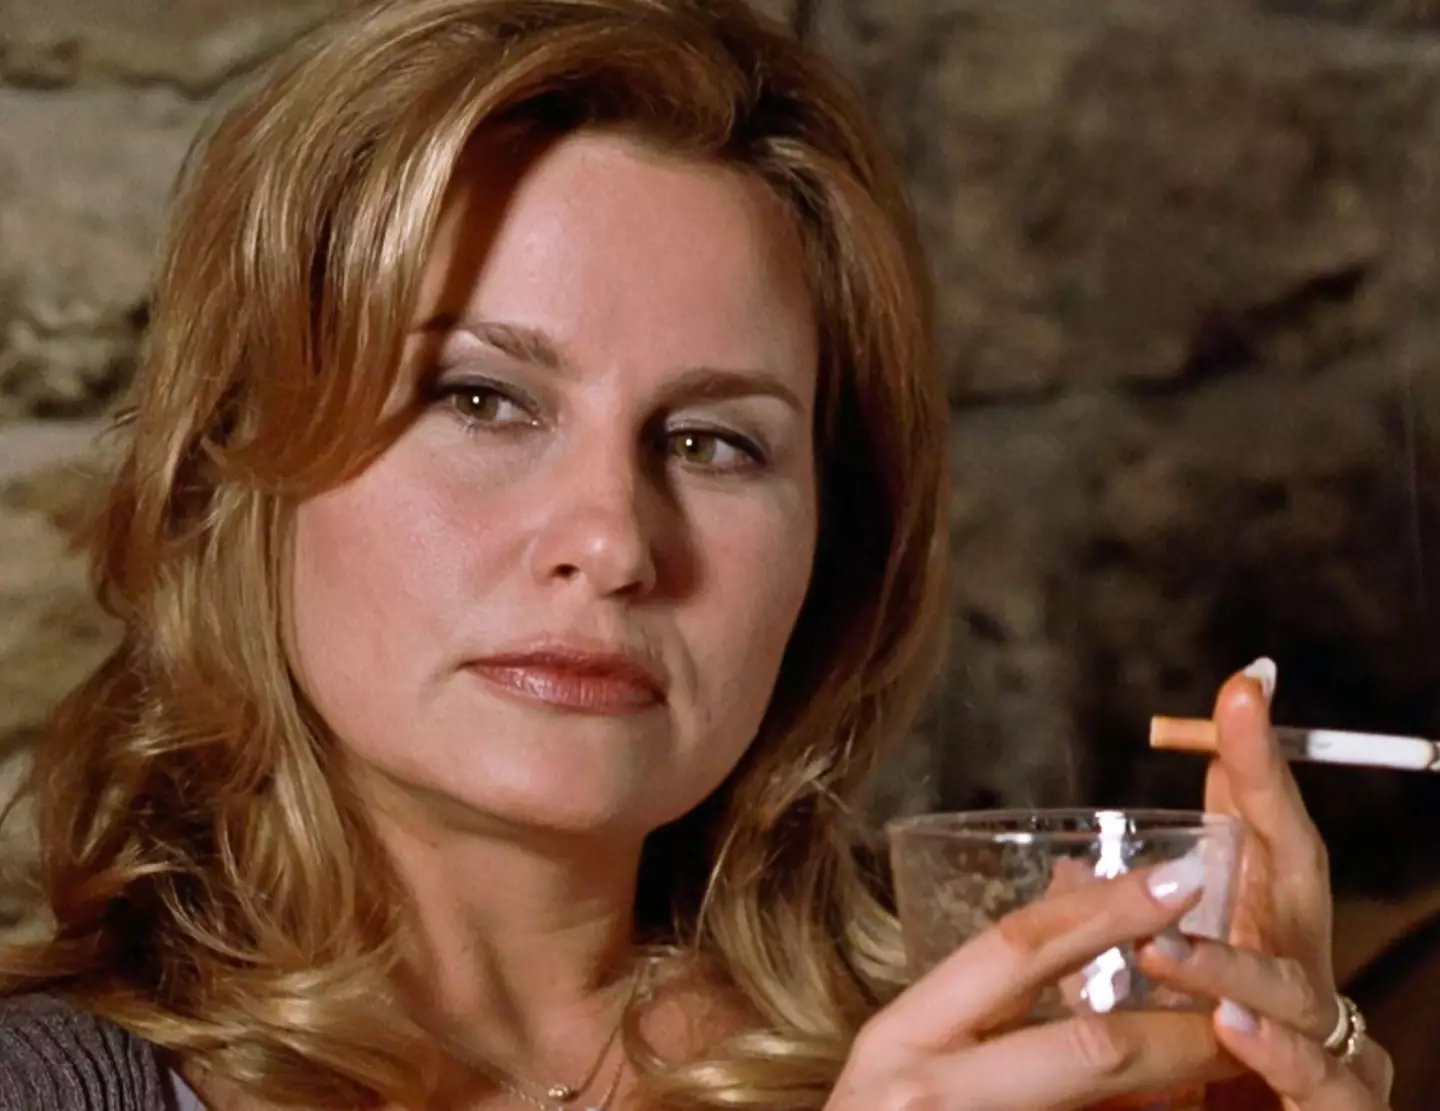 Jennifer Coolidge claimed the role of Stifler's mom changed her sex life.